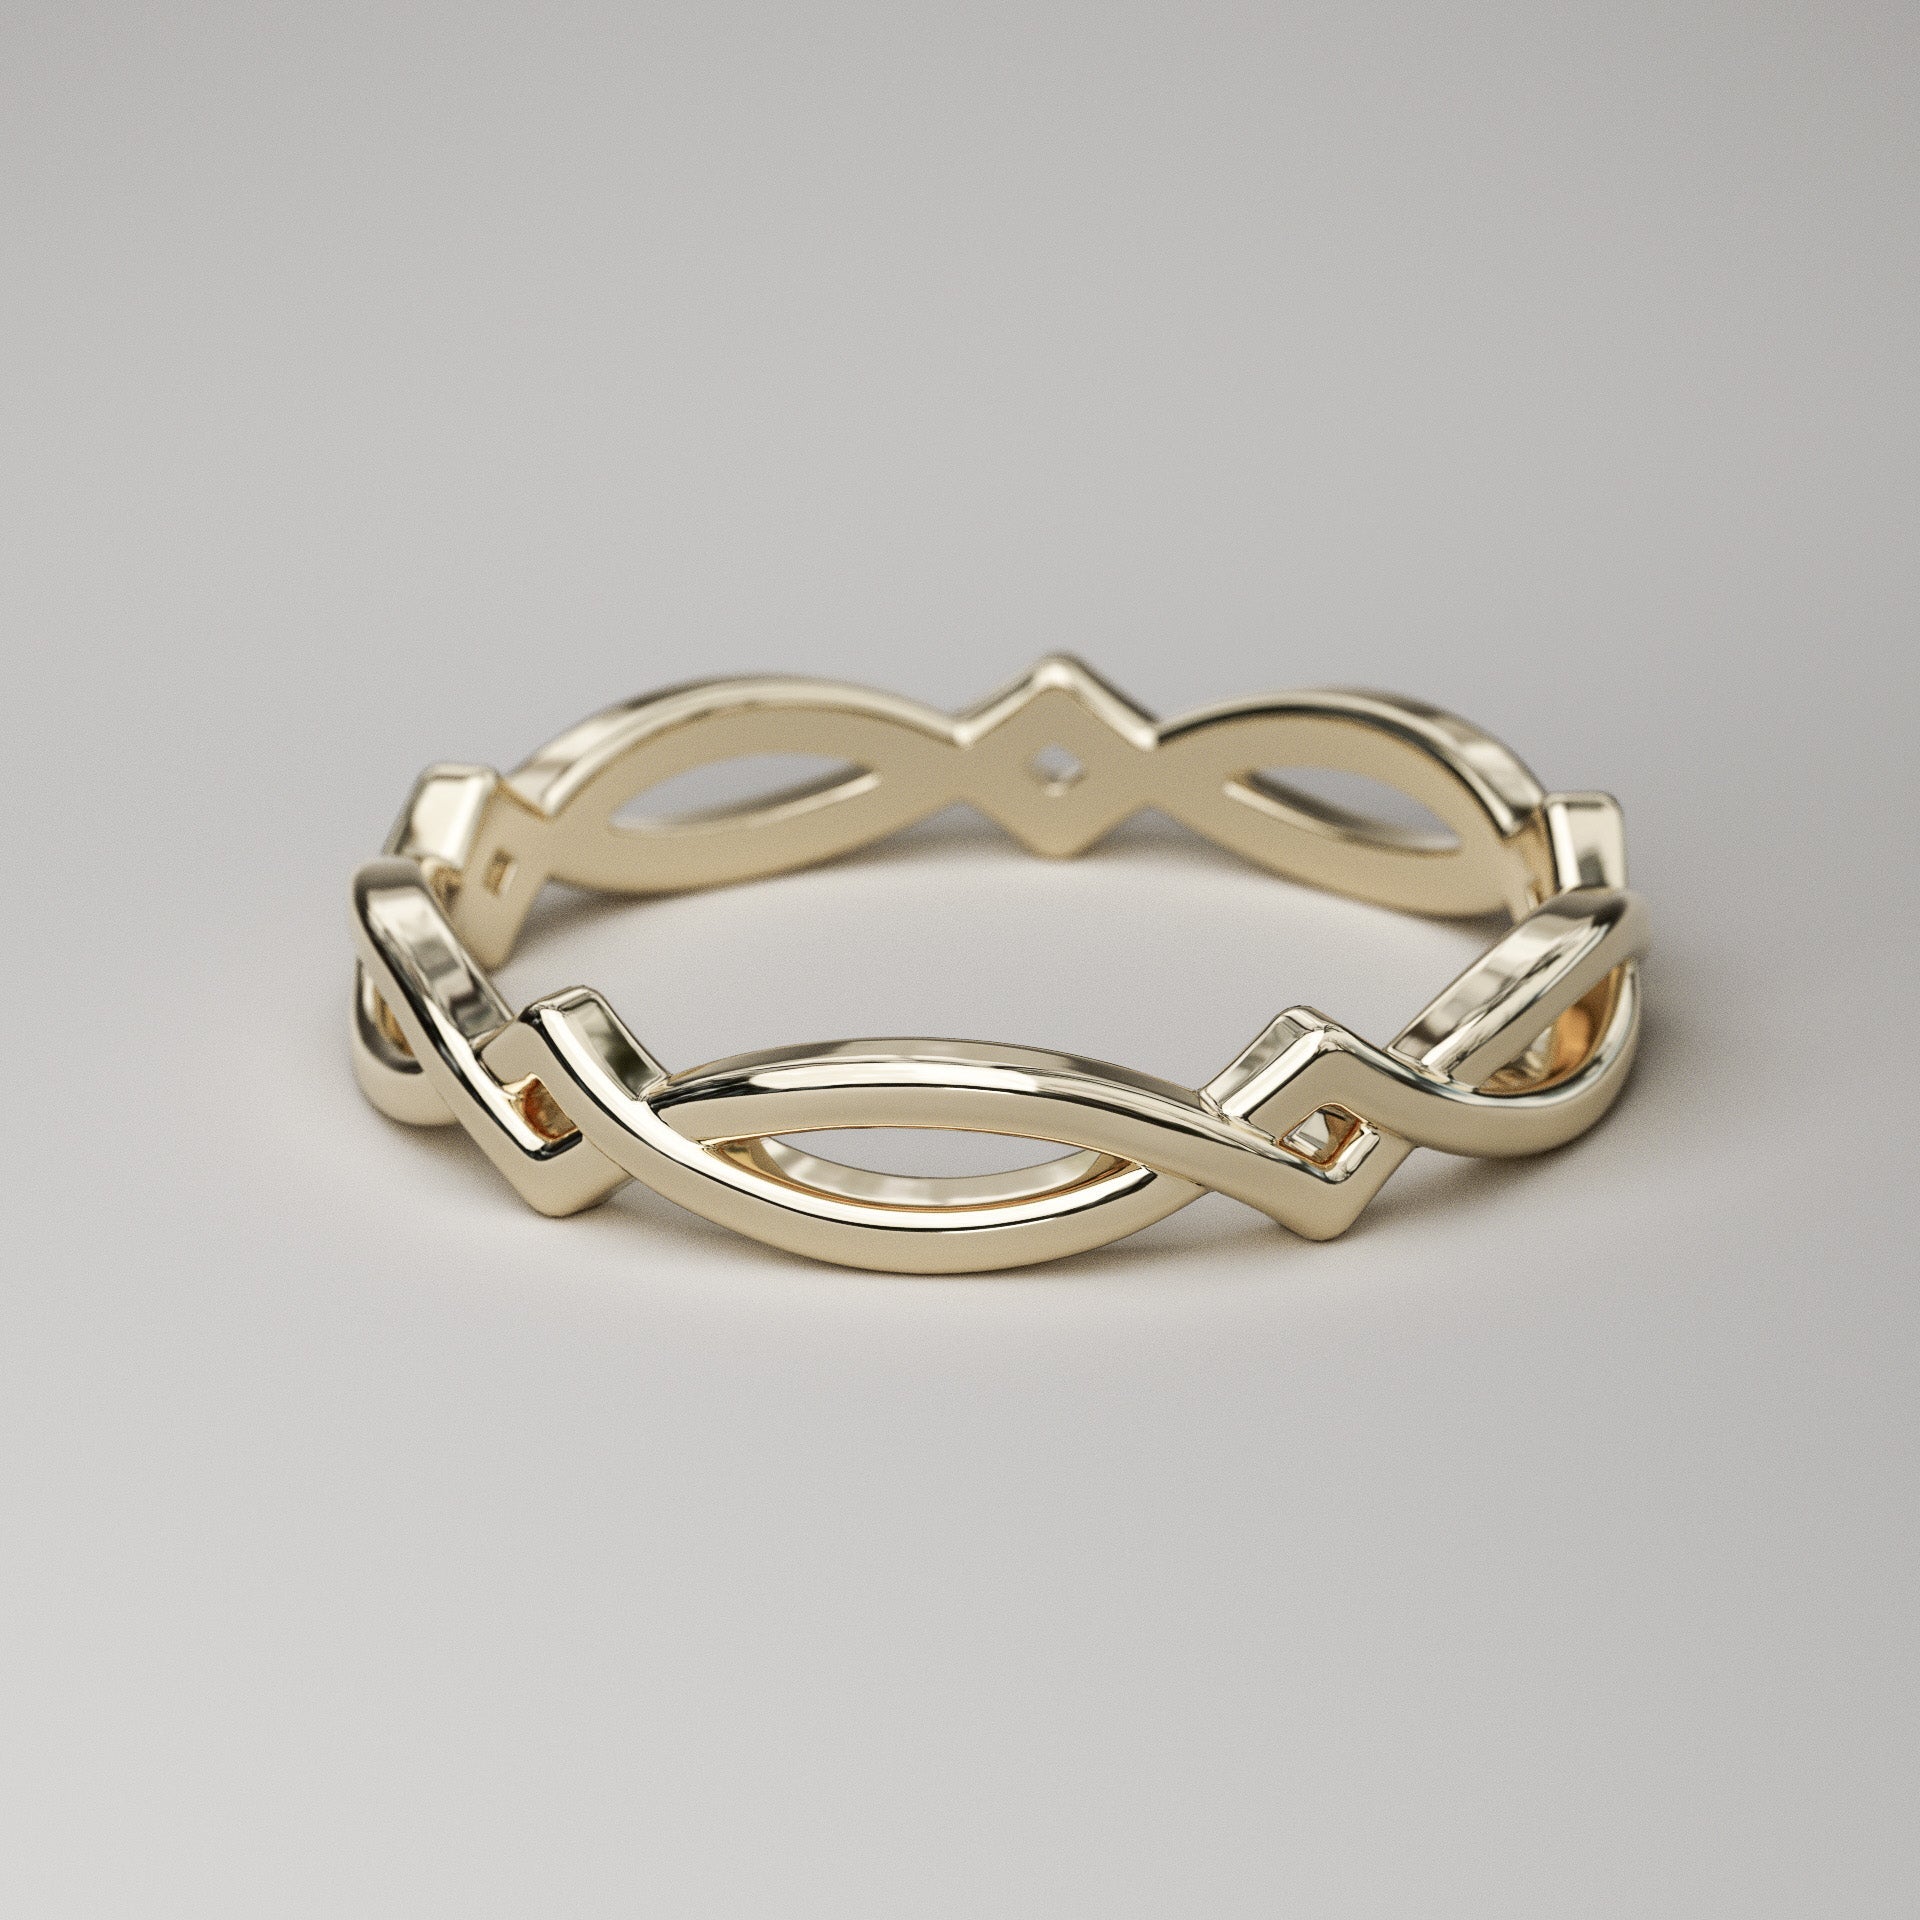 Woven gold band - A Celtic ring in yellow gold